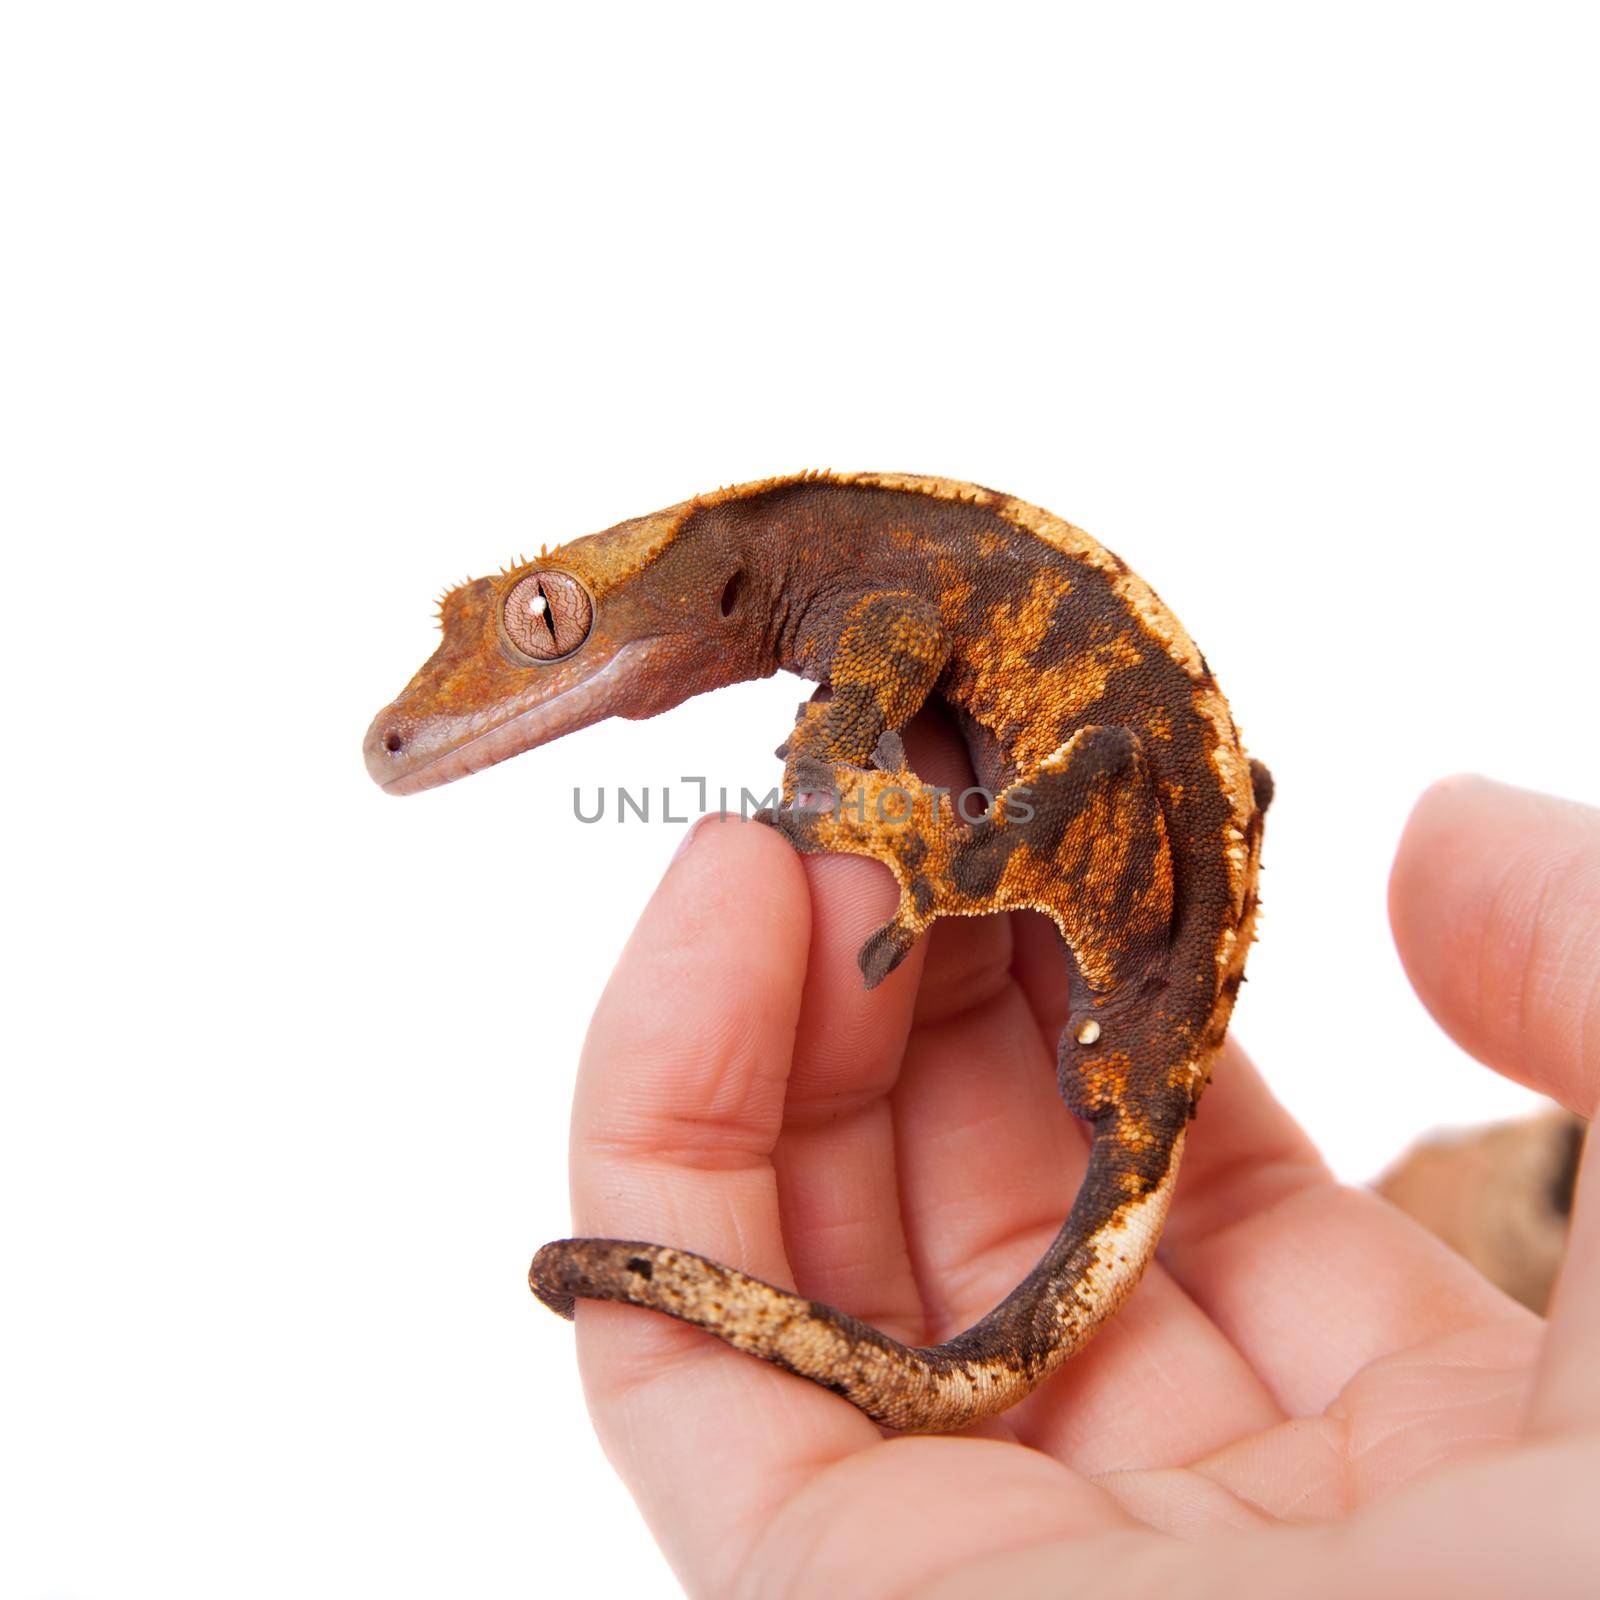 New Caledonian crested gecko on white by RosaJay